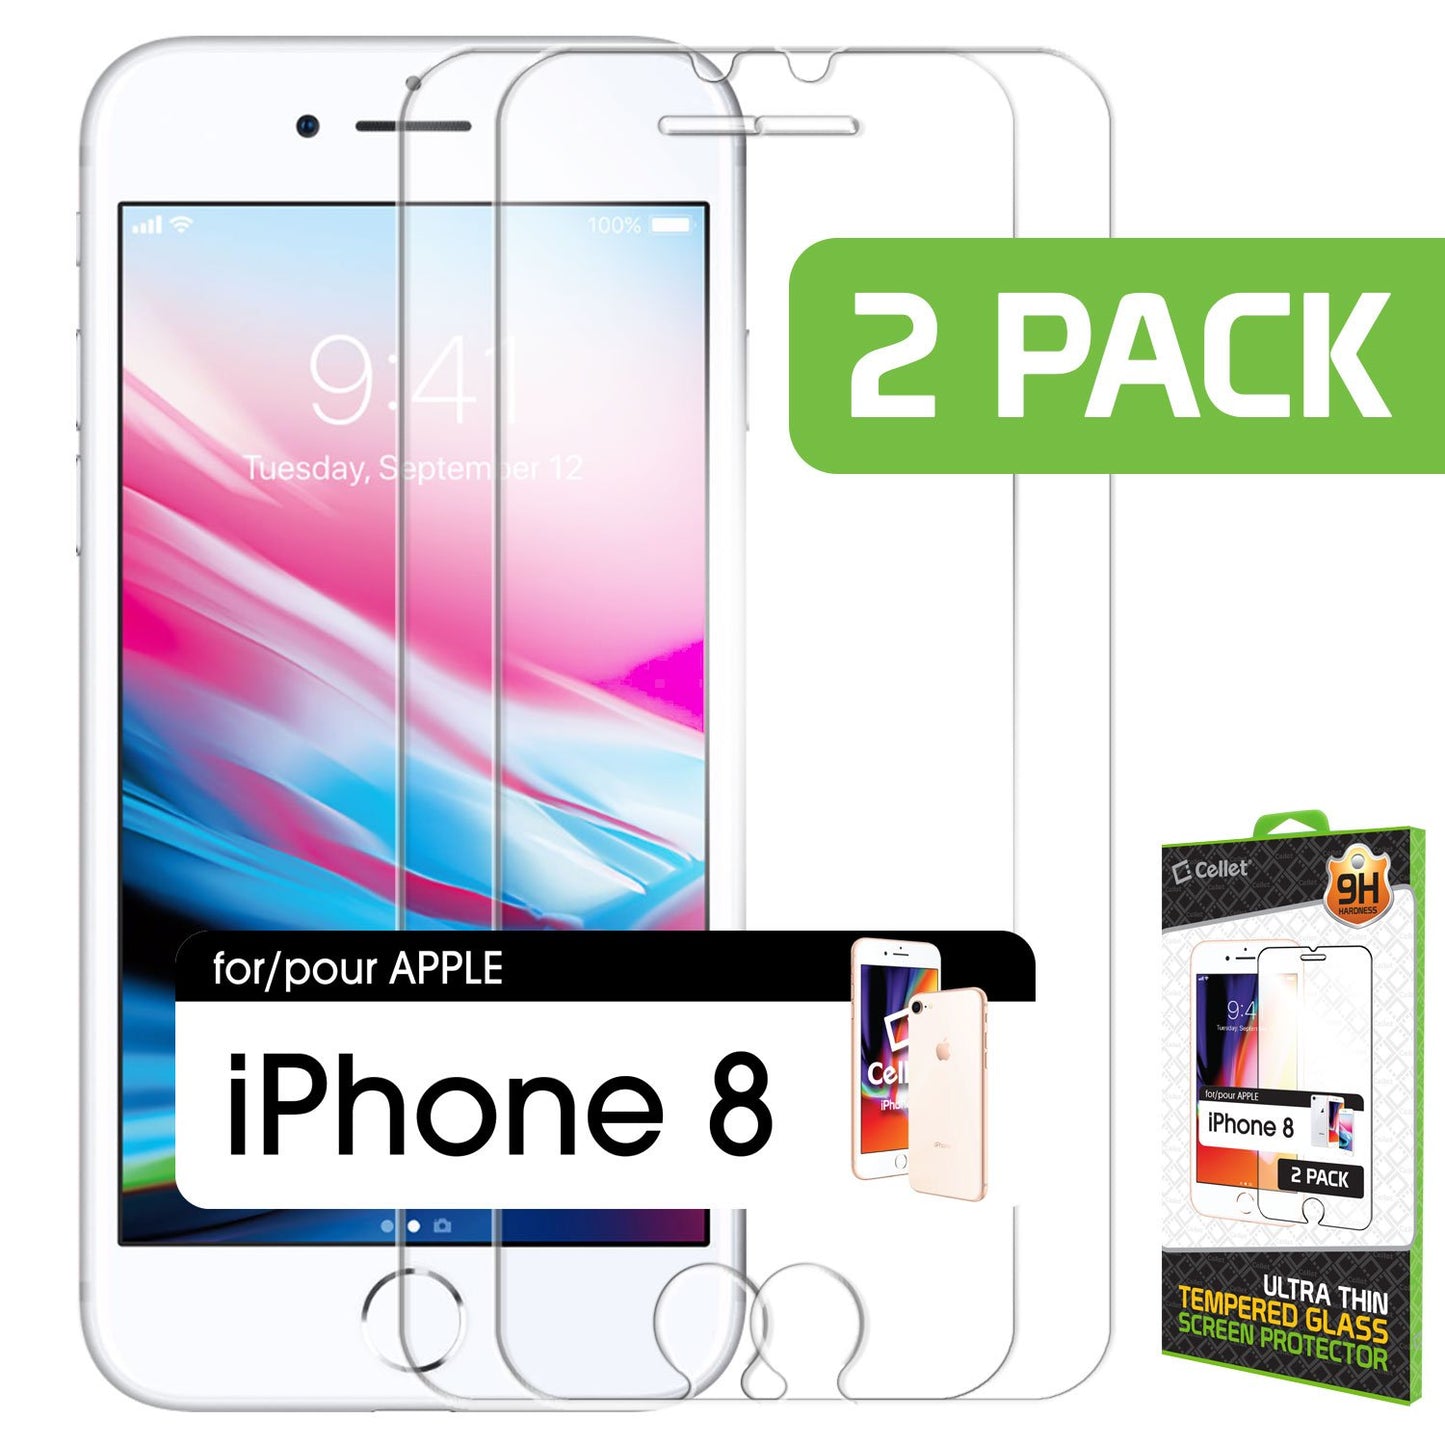 SGIPH82 - Cellet Premium Tempered Glass Screen Protector for Apple iPhone 8 – 2 Pack (0.3mm)